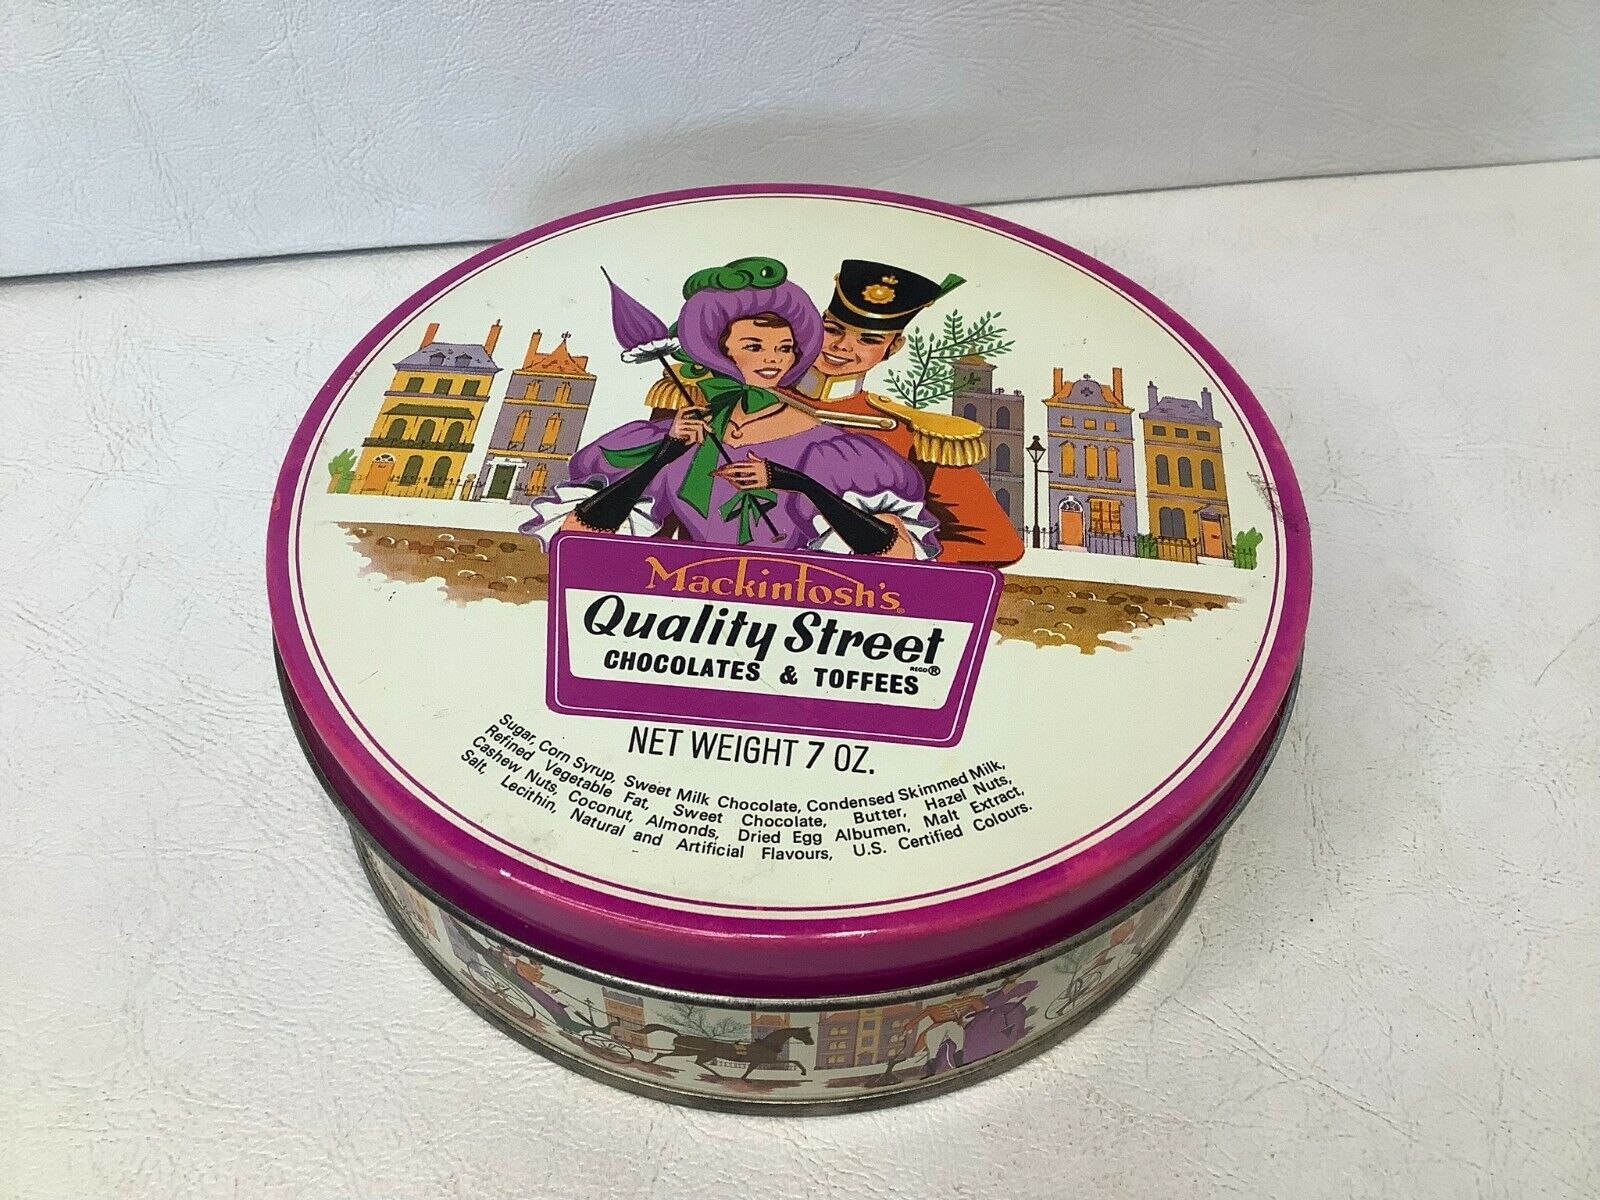 Vintage Mackintosh’s Quality Street Chocolates and Toffees Collectible Tin